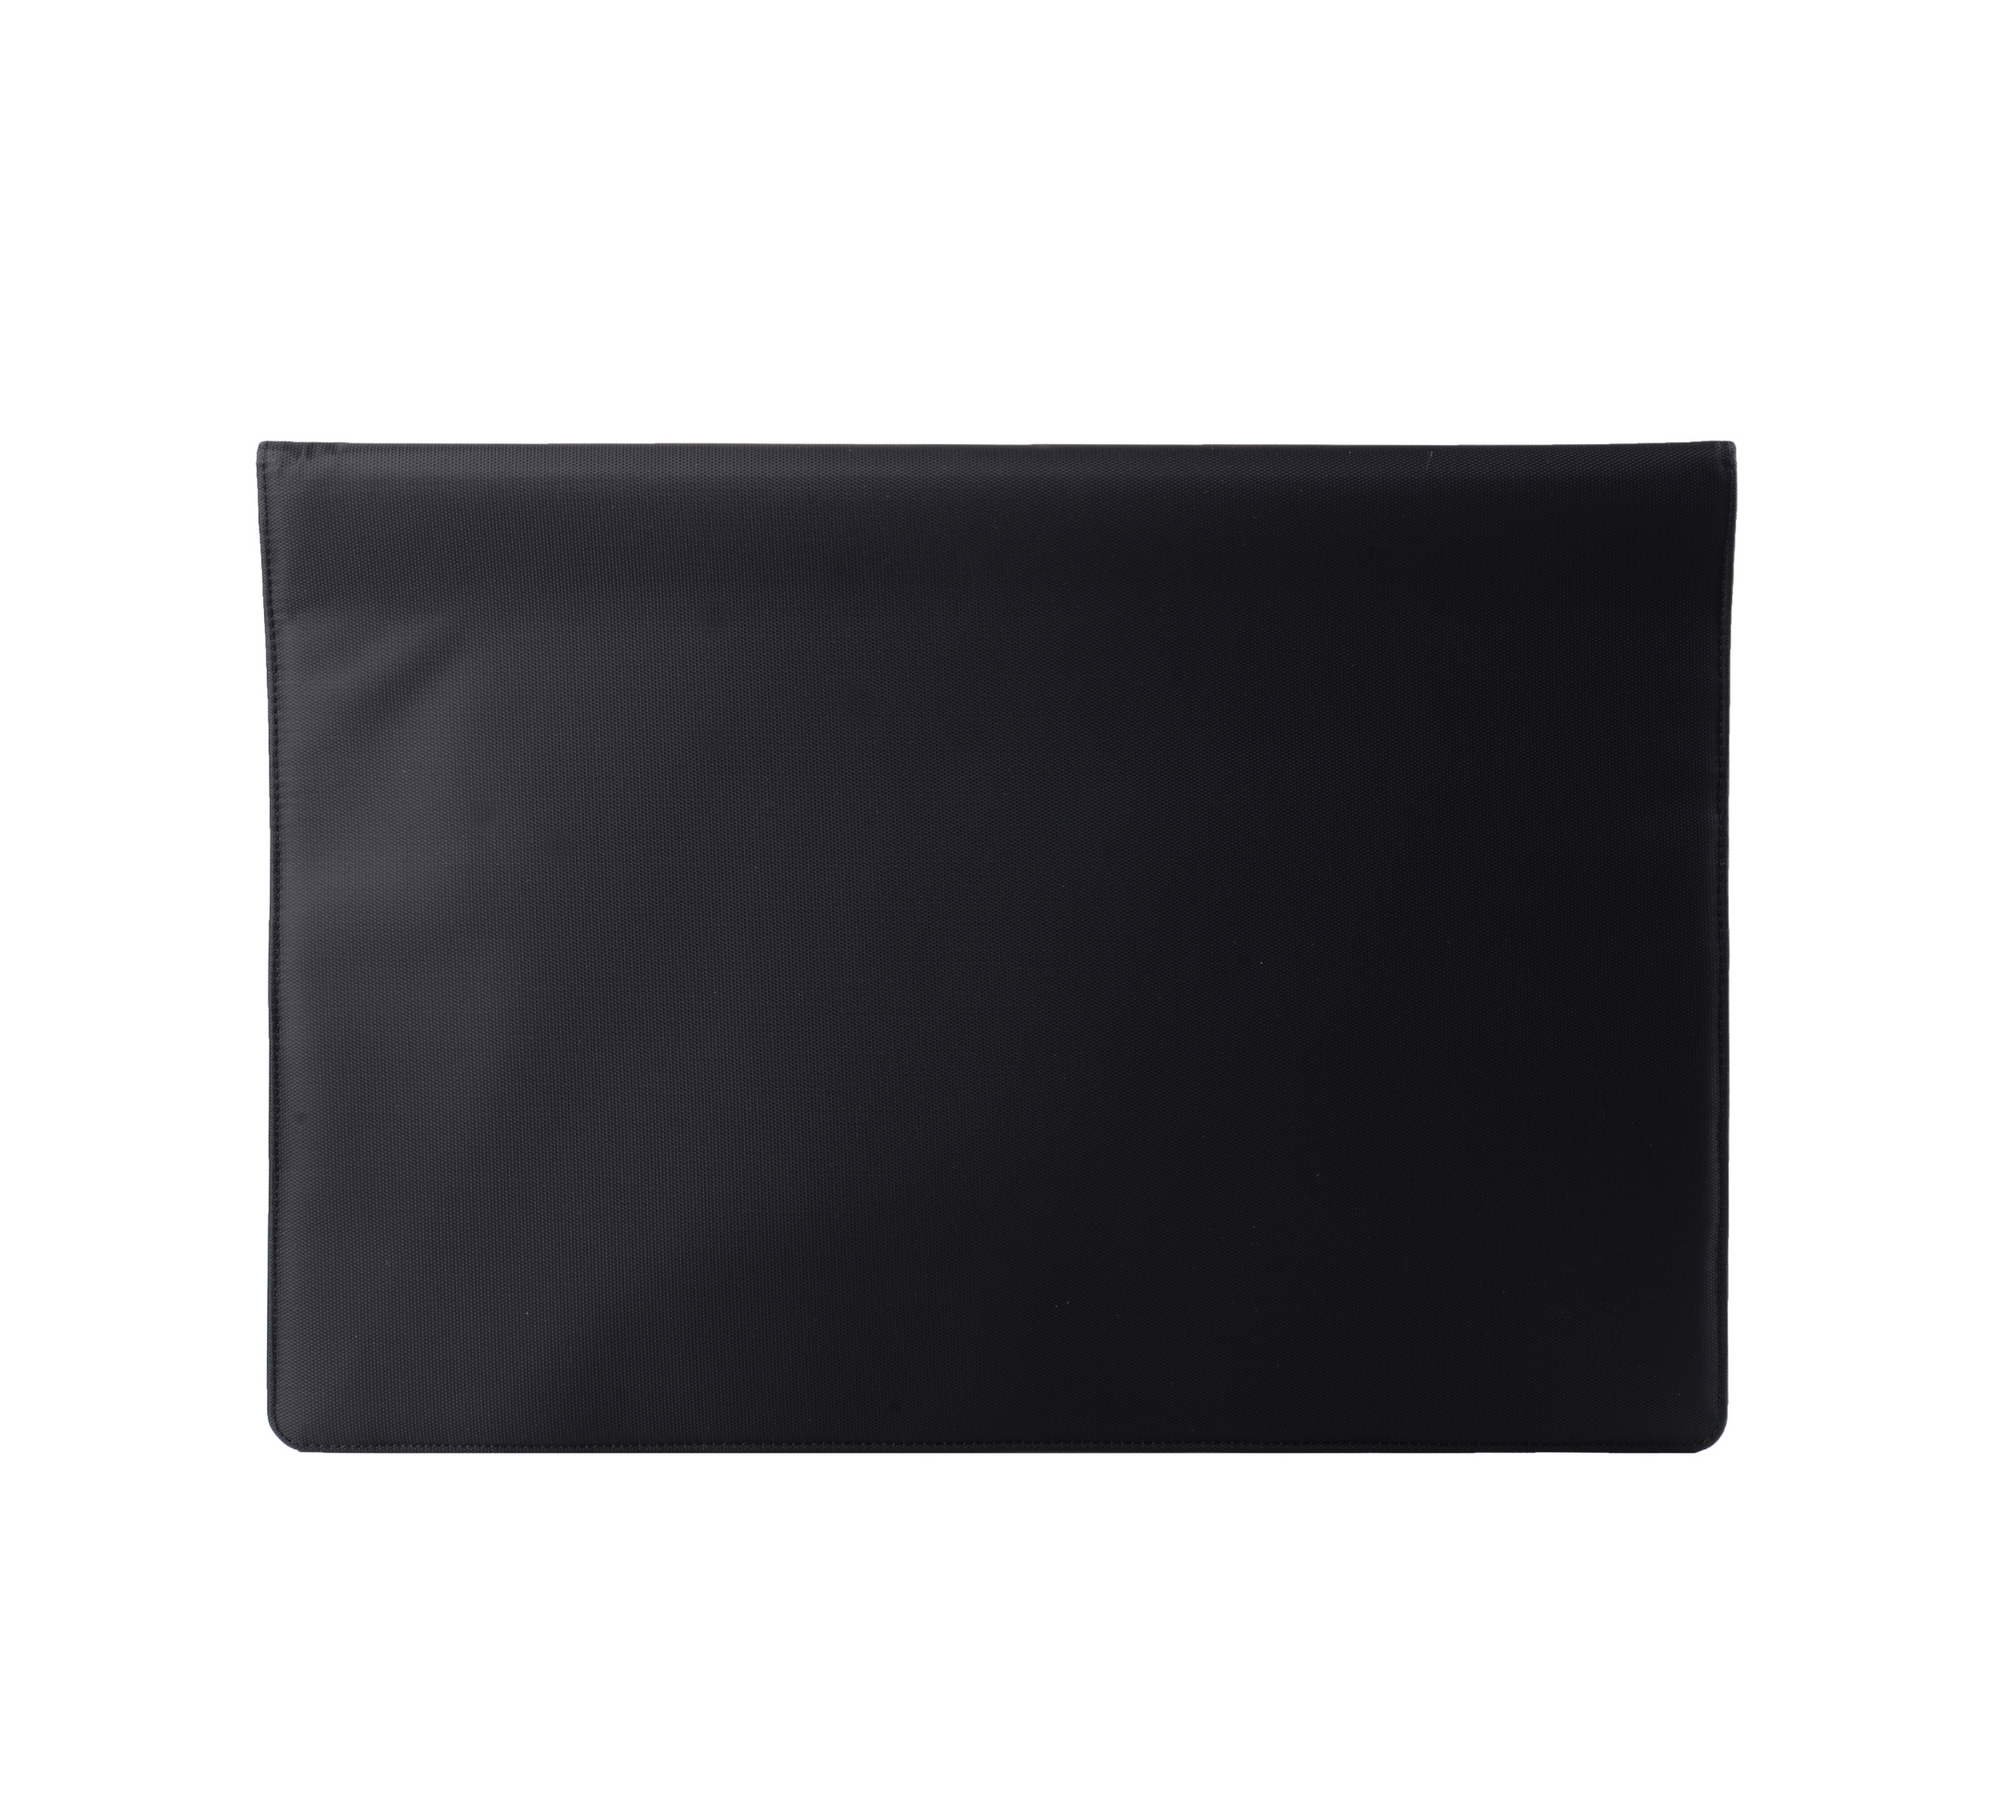 SLNT Faraday Laptop and Tablet Sleeves Weatherproof Nylon Black Accessories SLNT Tactical Gear Supplier Tactical Distributors Australia